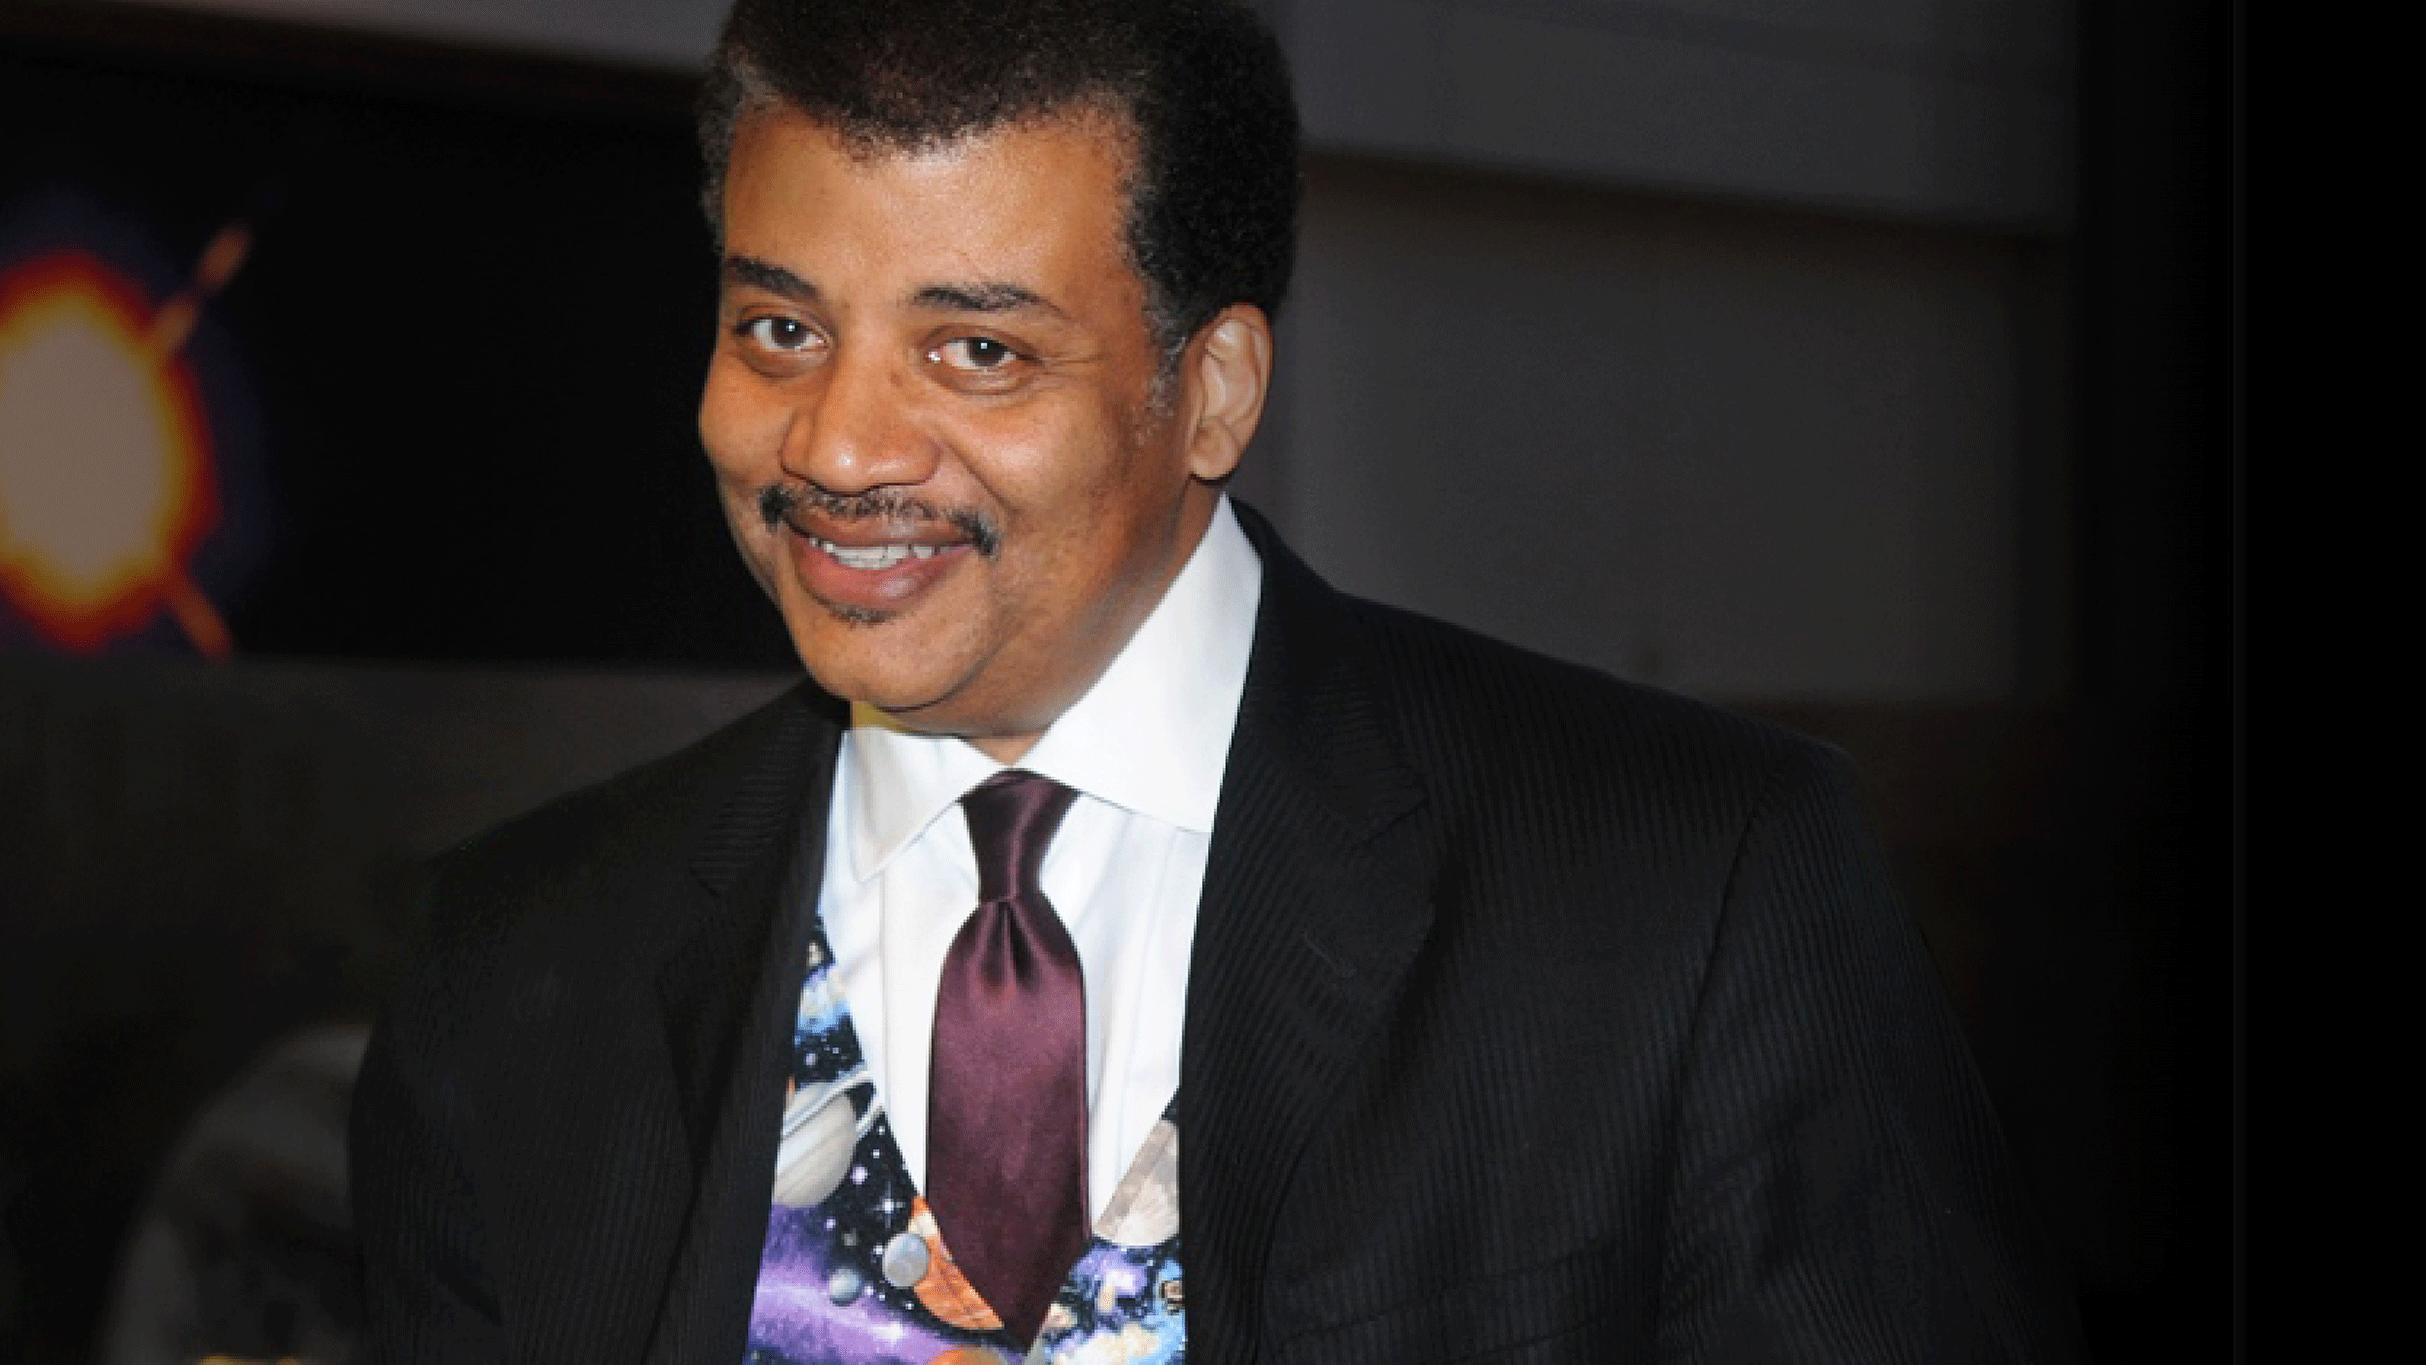 Neil deGrasse Tyson: Science as a Way of Knowing